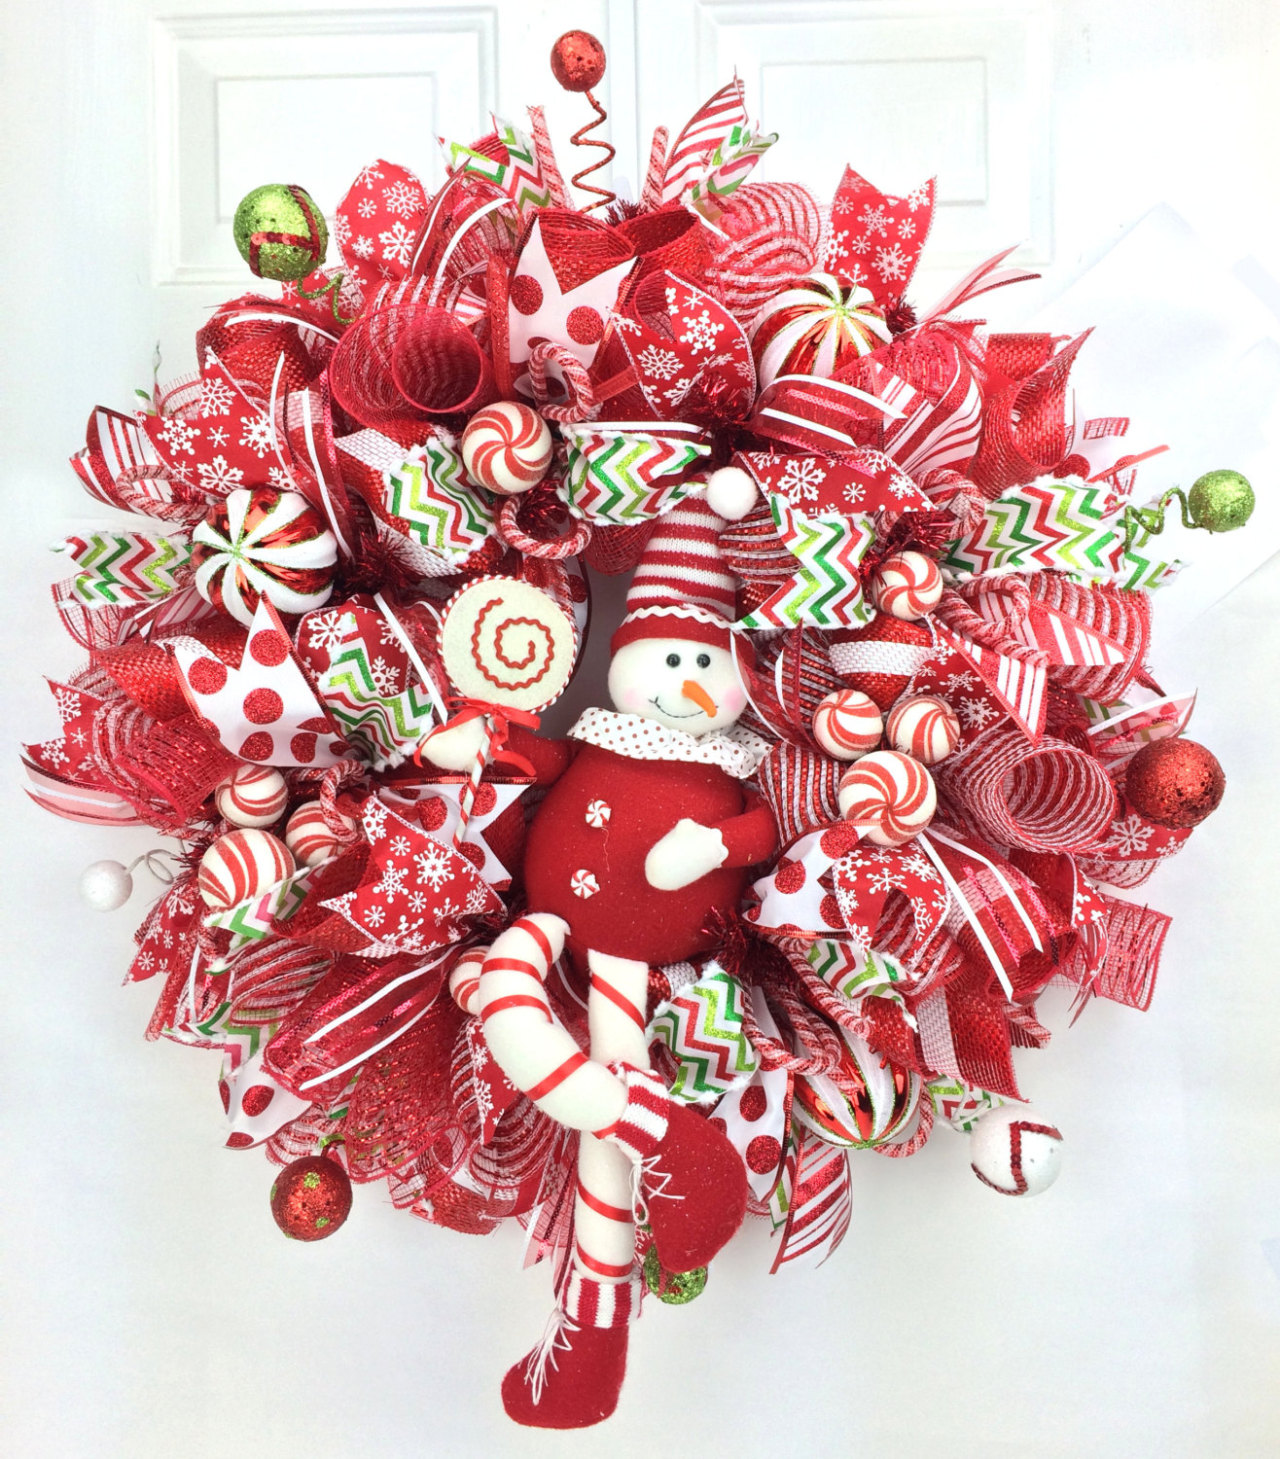 candy wreath Christmas wreath decomesh wreath front door wreath red/white wreath peppermint wreath